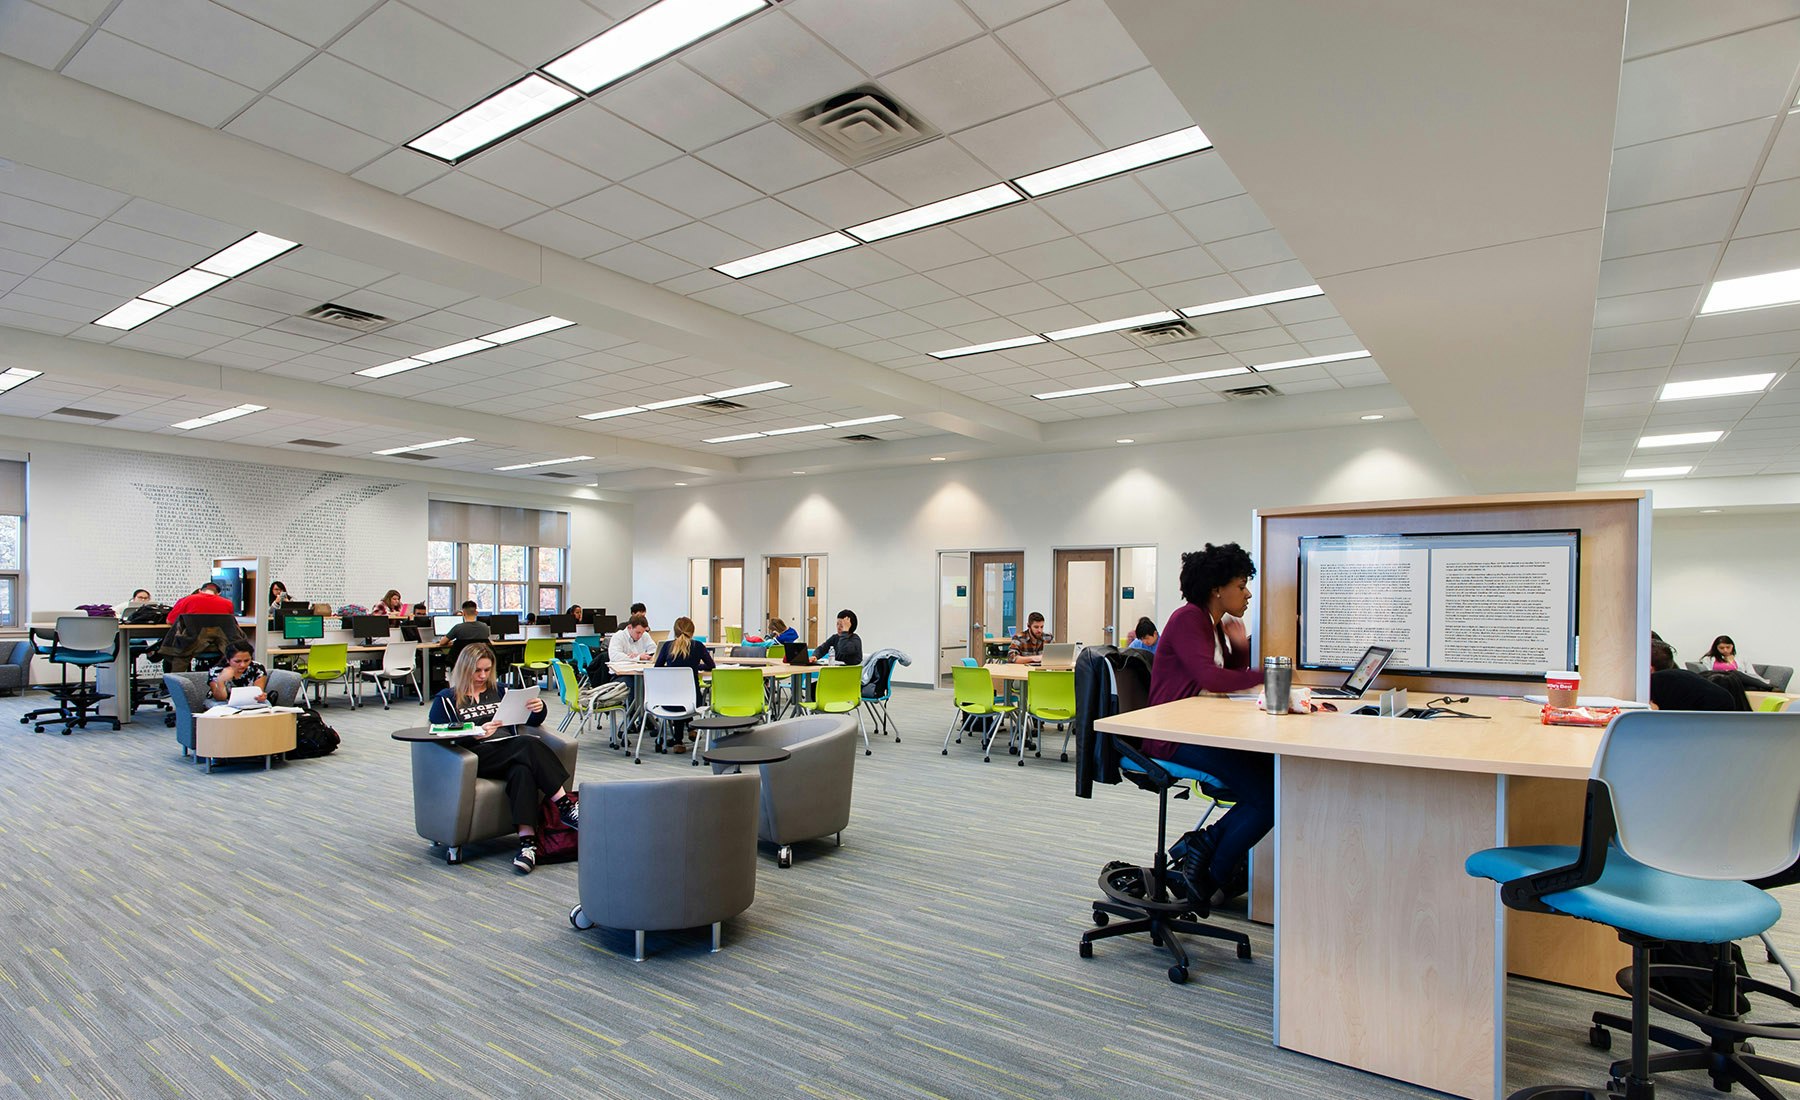 The renovation of the 3rd floor of Innovation Hall on GMU’s Fairfax campus involved updating a once static, fixed academic interior space into a dynamic, flexible, and collaborative learning environments for GMU students.